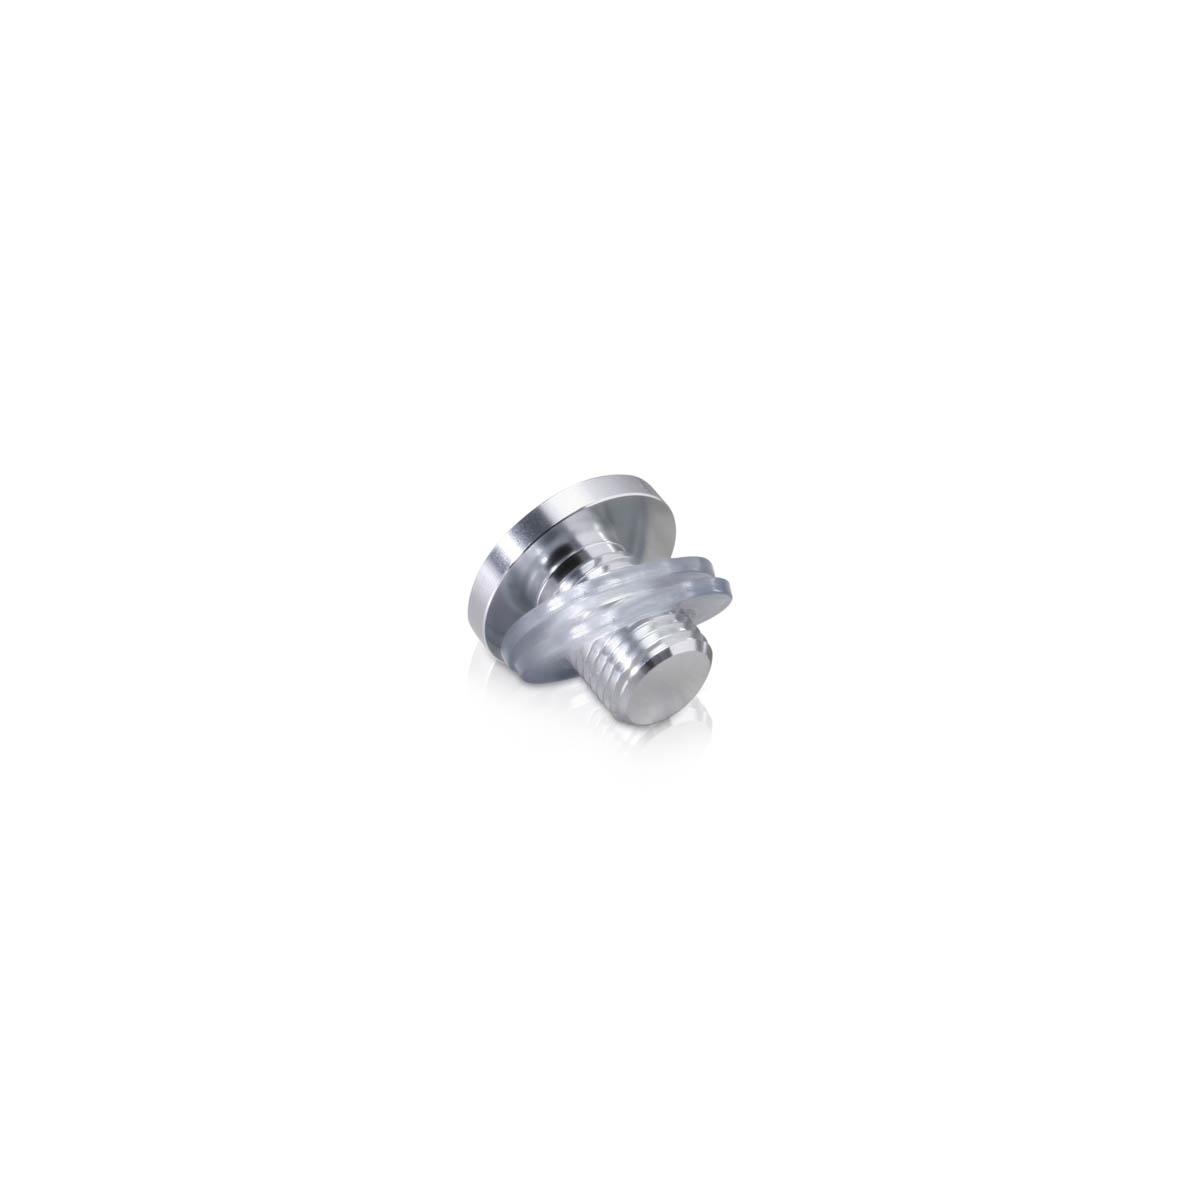 AL19-12AS Head replacement for Mbs-Standoffs 3/4'' Diameter x 1/2'' Barrel Length, Aluminum Clear Shiny Finish Standoffs (Includes 2 Silicone Washers).